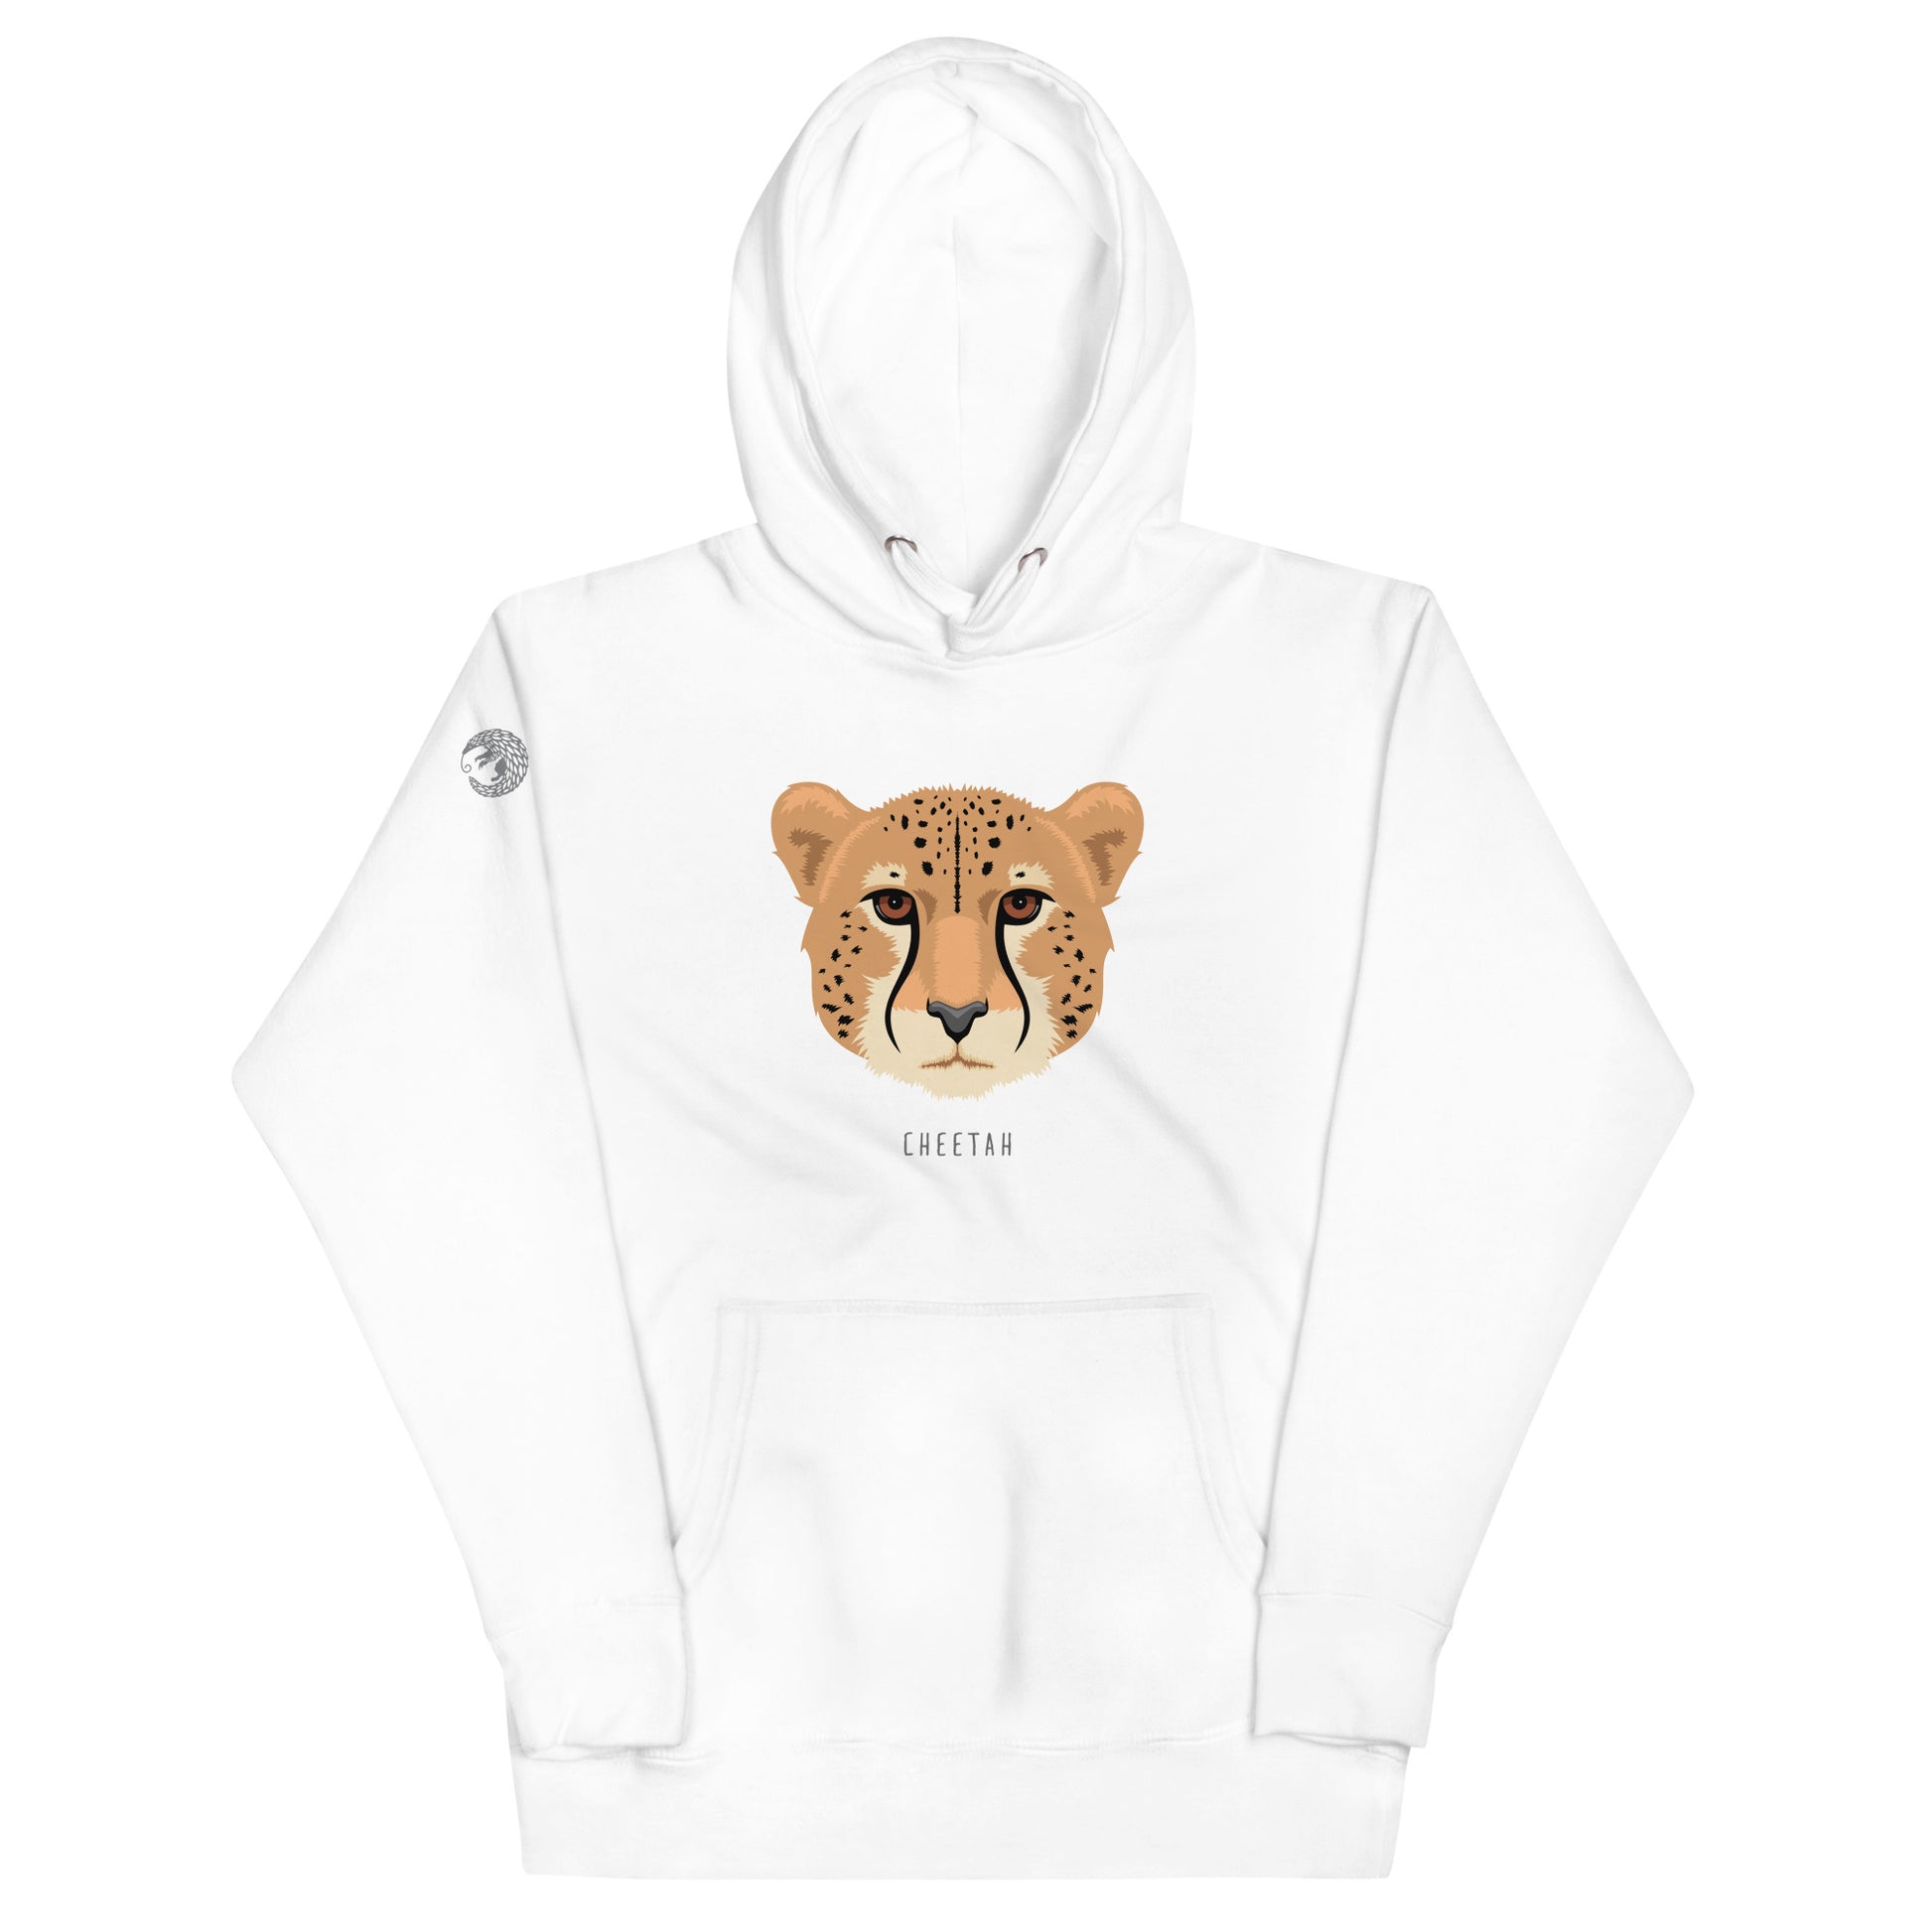 A white, hooded, pullover sweatshirt with an illustration of a cheetah's face and thew world "cheetah" beneath it. 